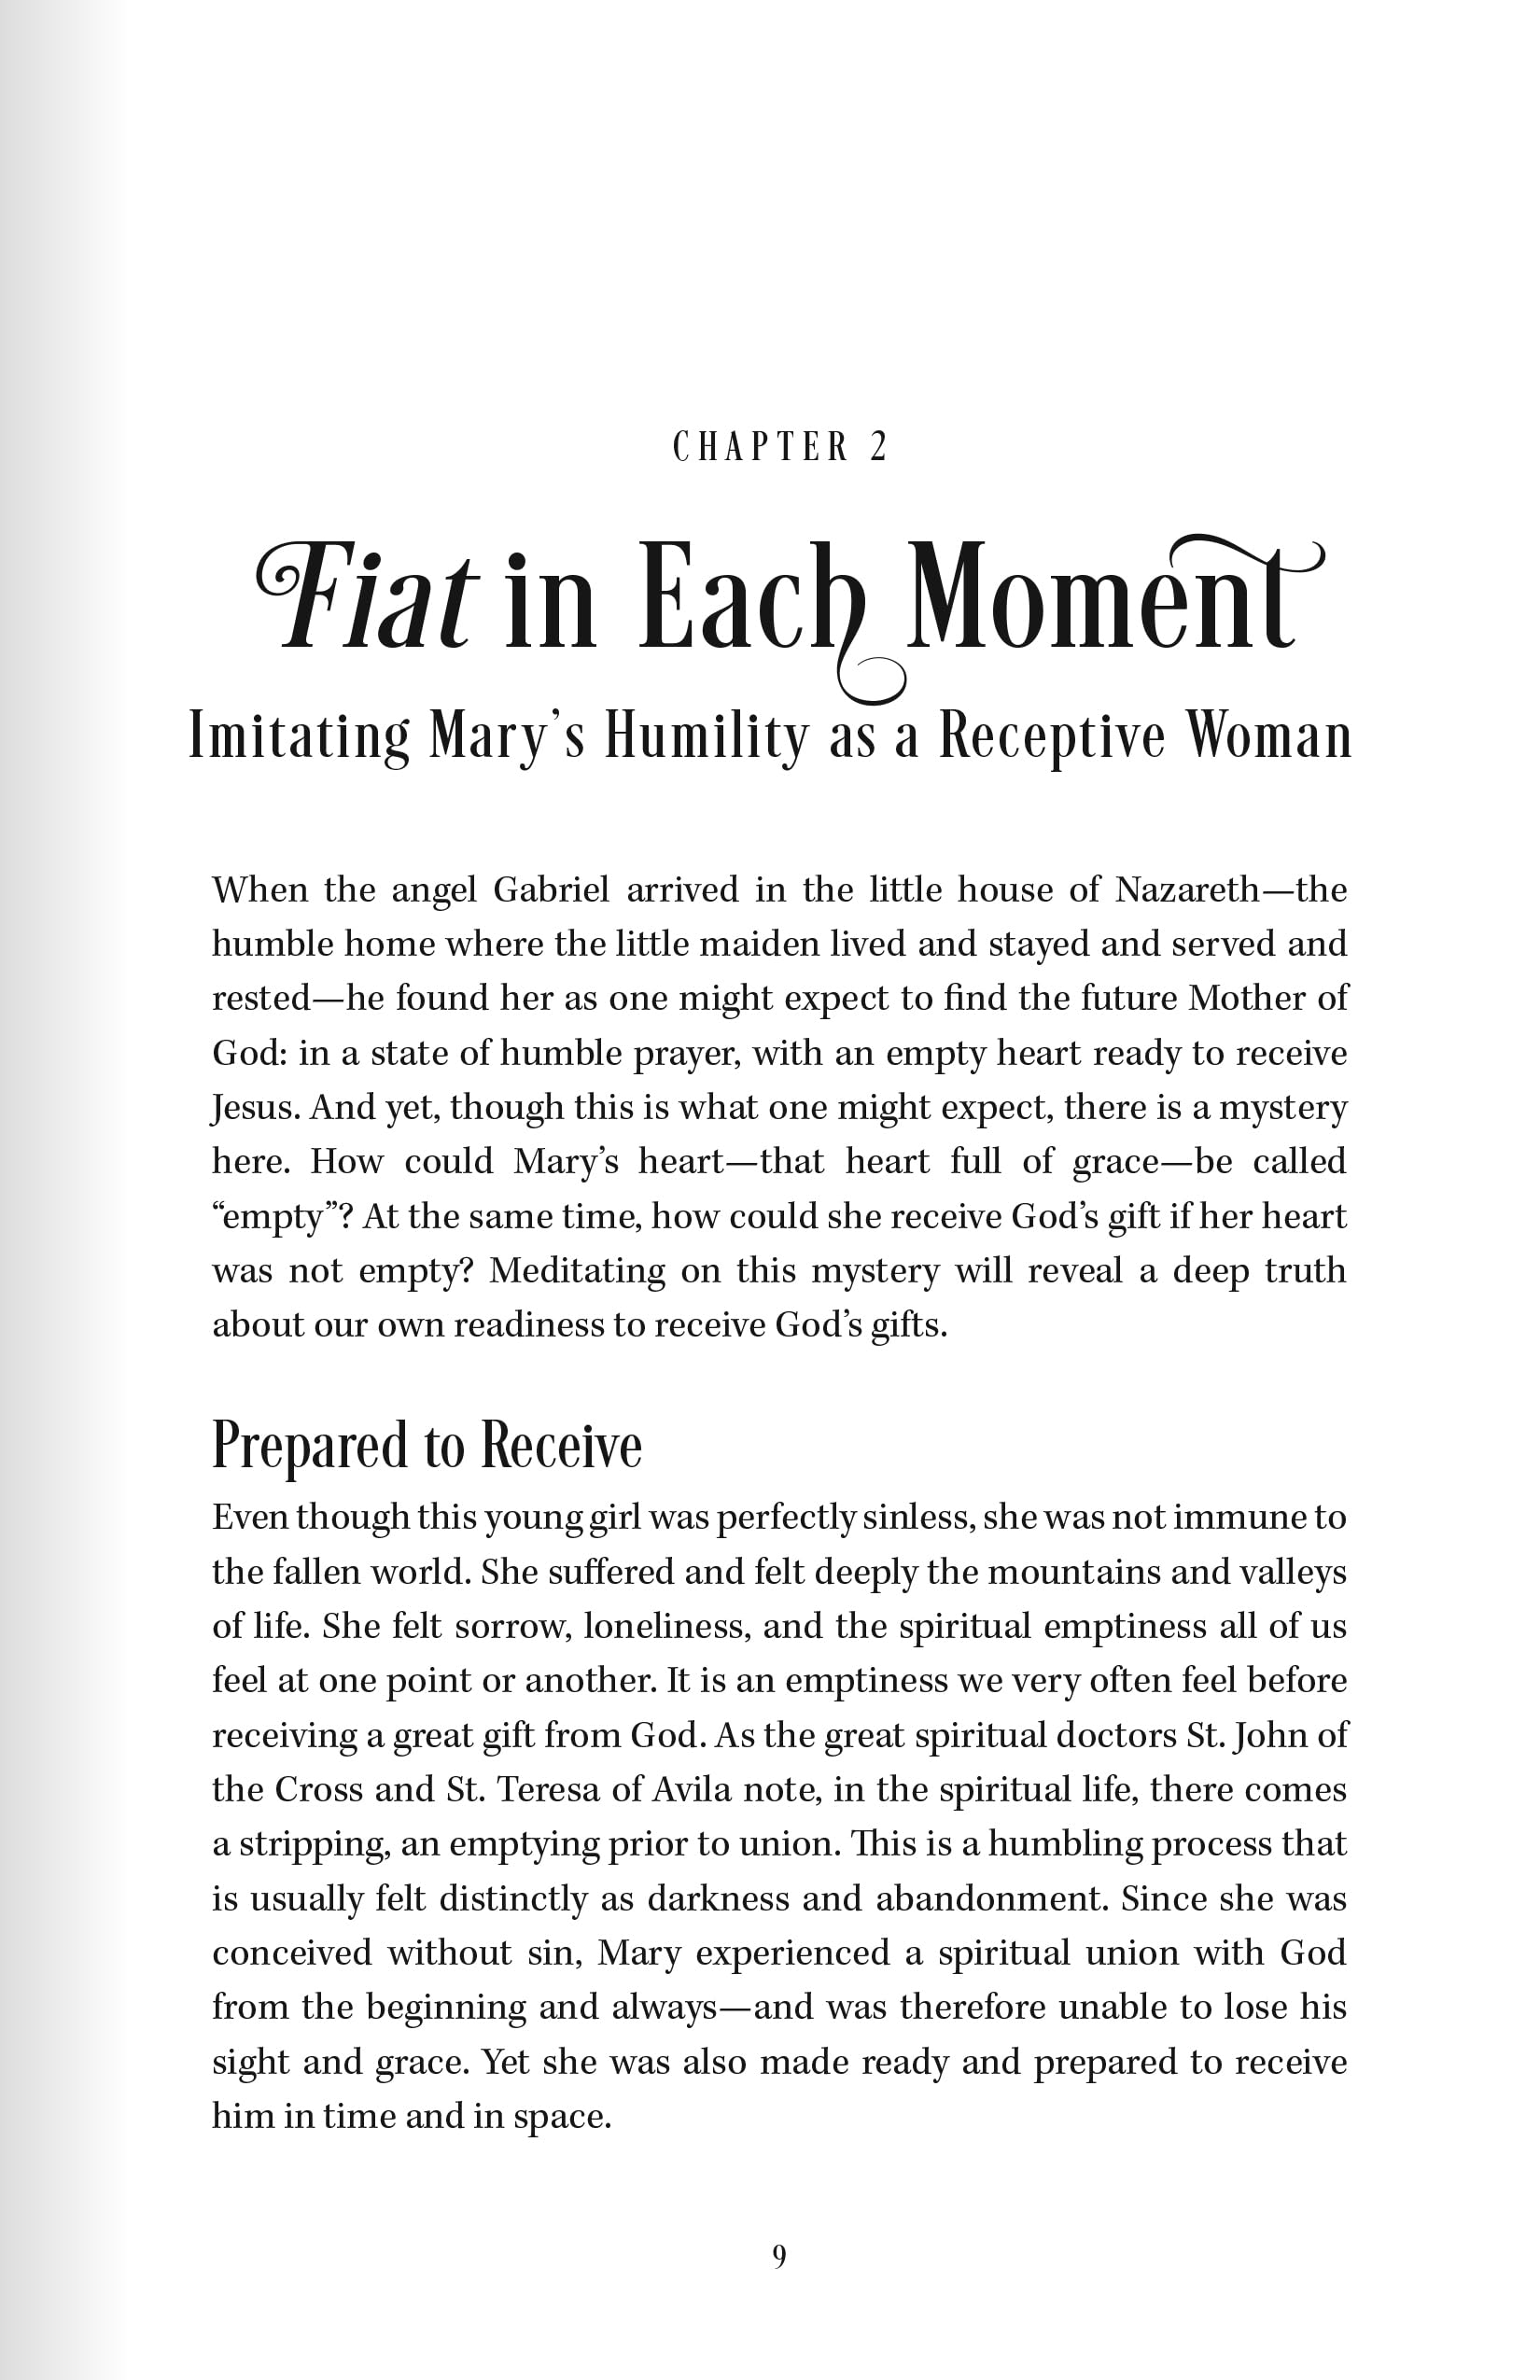 Mary, Teach Me to Be Your Daughter: Finding Yourself in the Blessed Mother